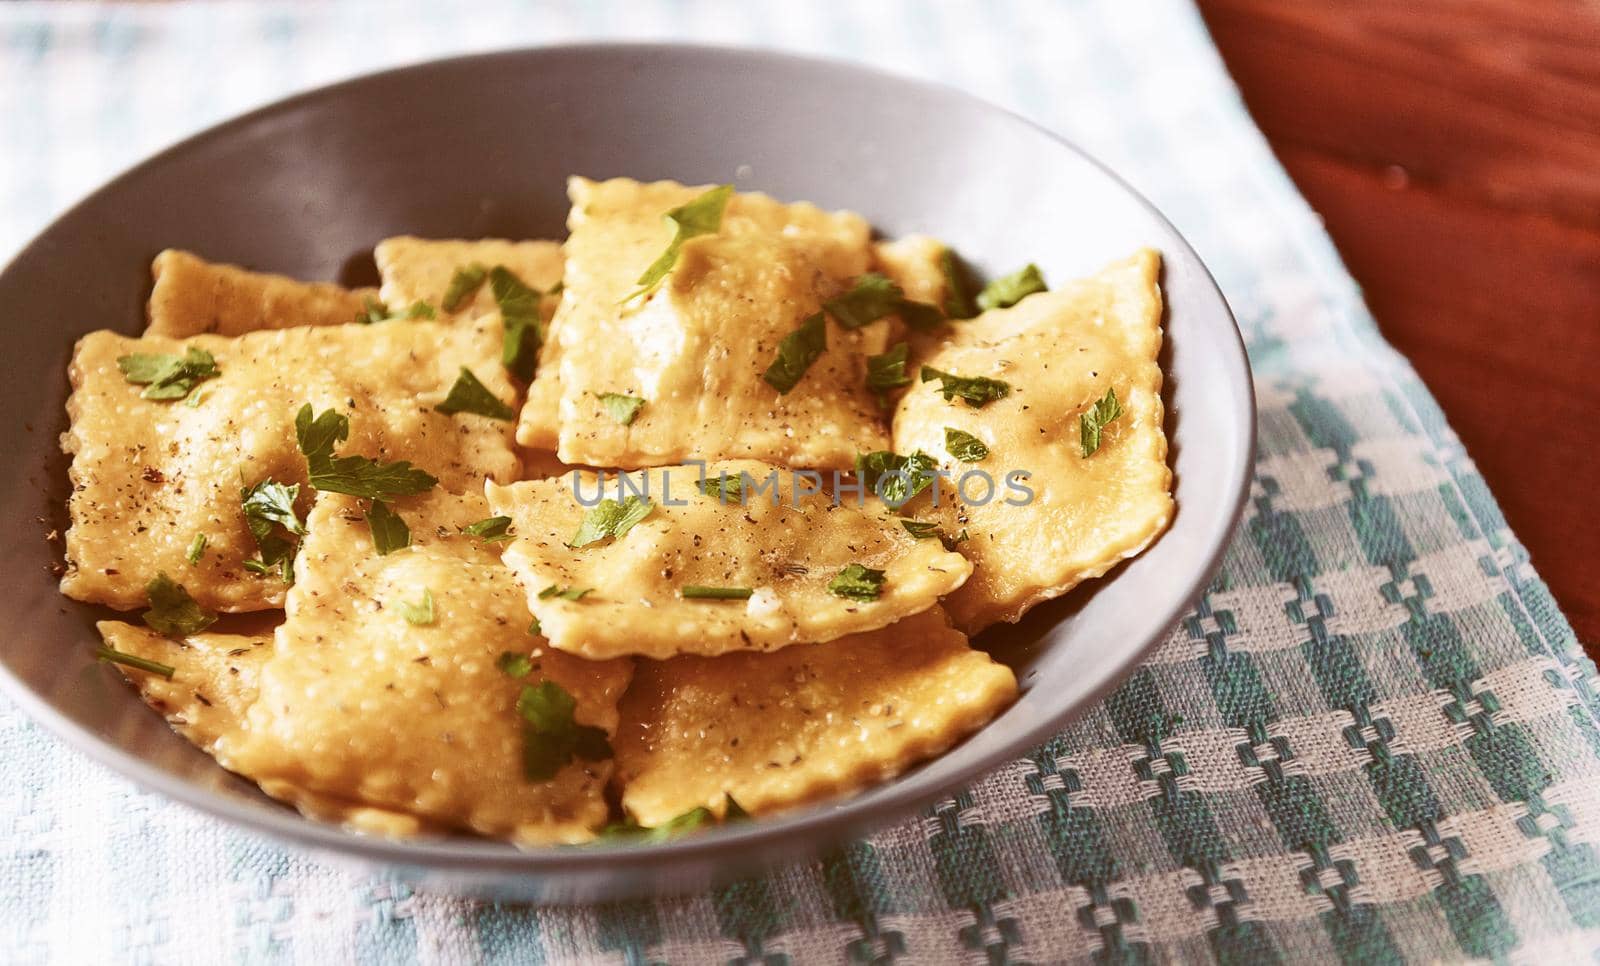 Plate with authentic ravioli